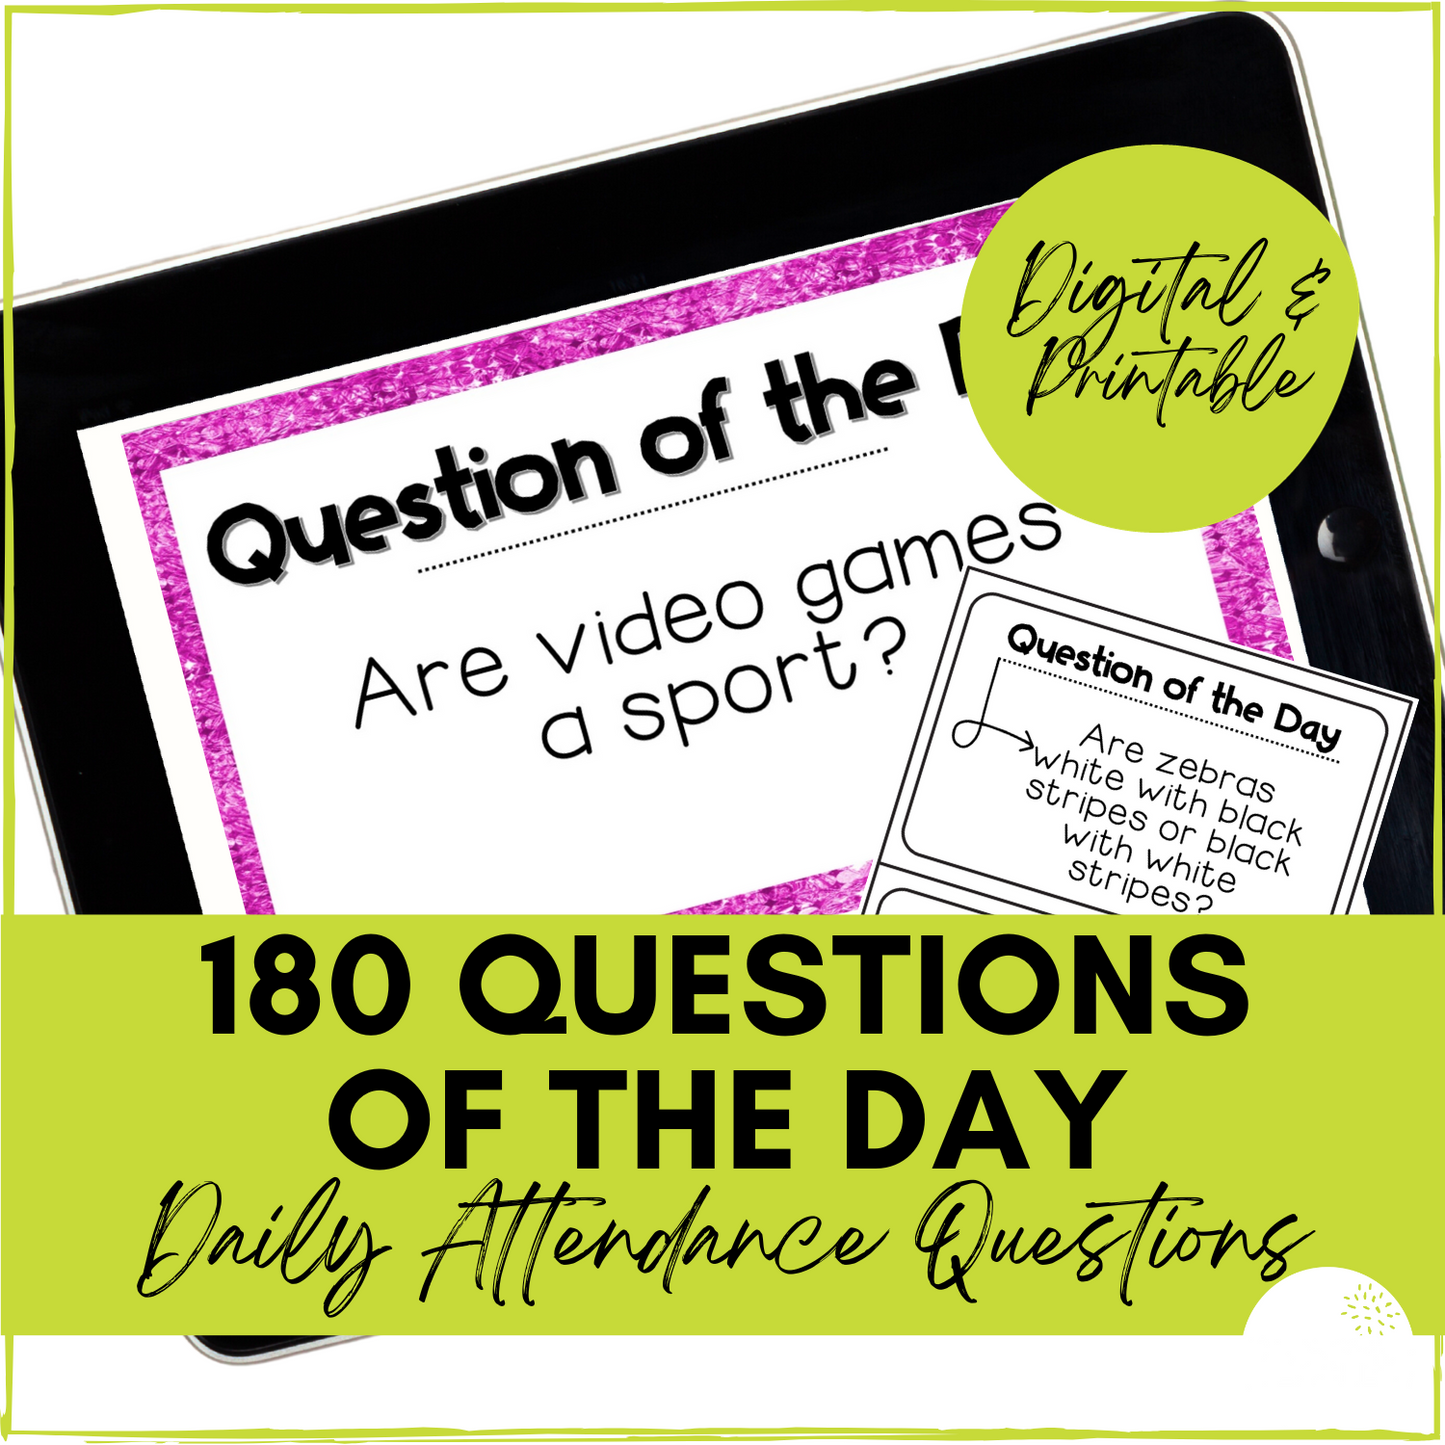 180 Attendance Questions - Digital and Print Debate Questions